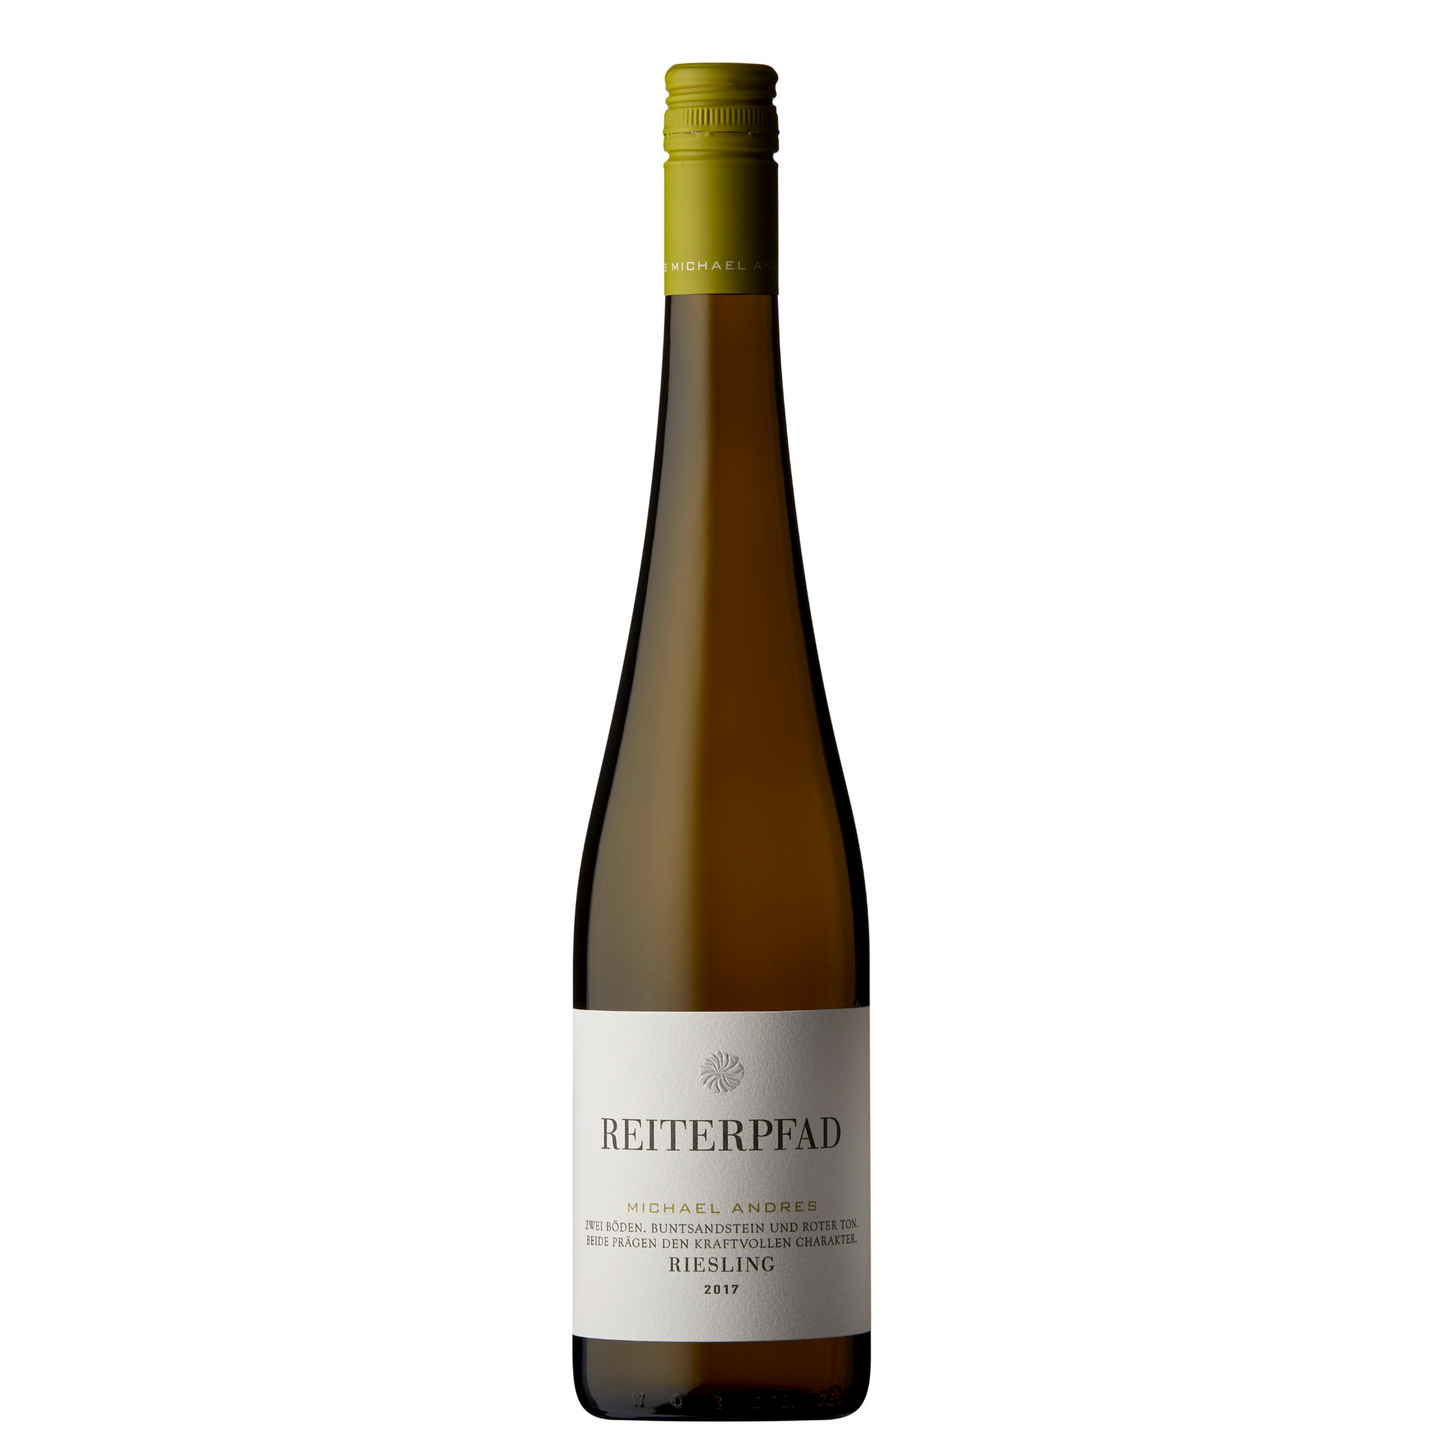 MiCHAEL ANDRES | 2o2oer Ruppertsberger Reiterpfad Riesling  o.75l